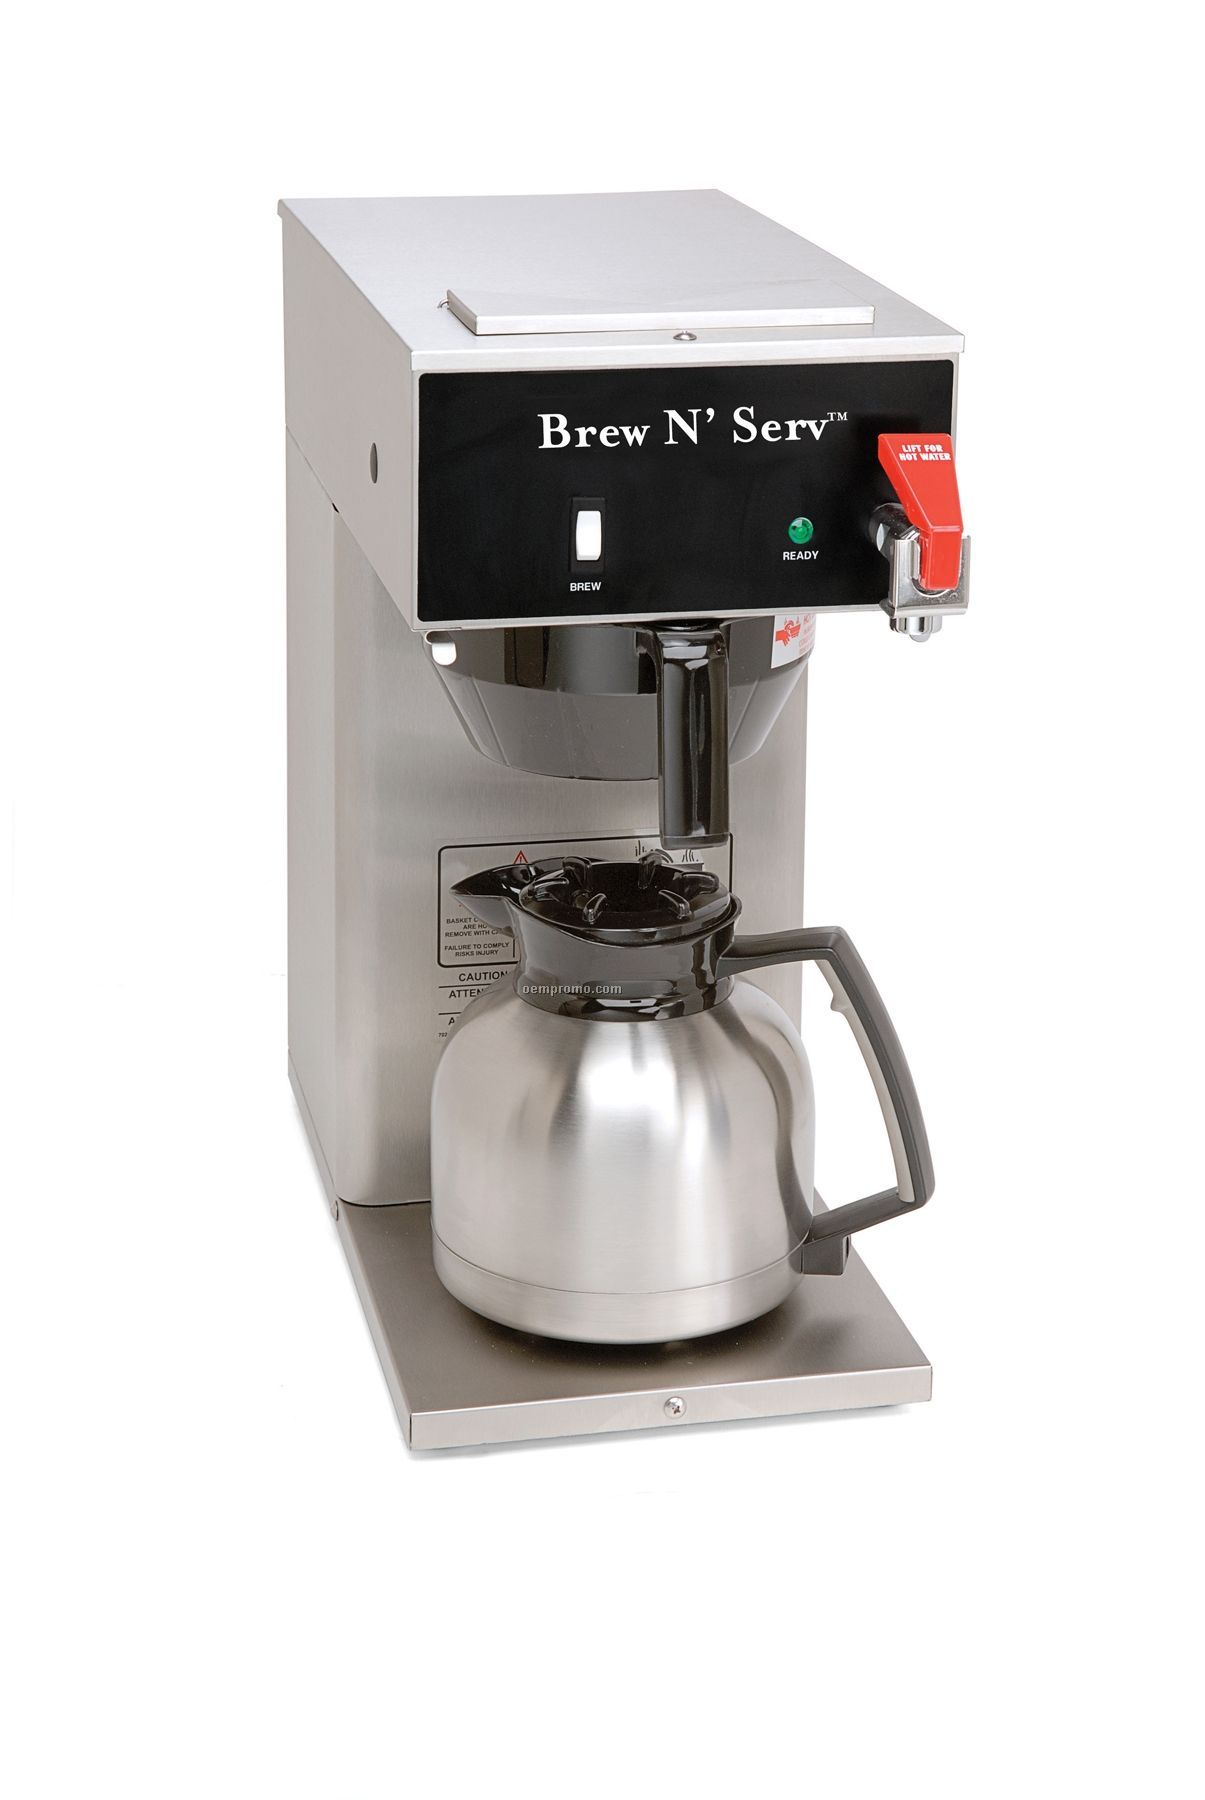 Brew N' Serv Thermal Carafe Automatic Brewer Package